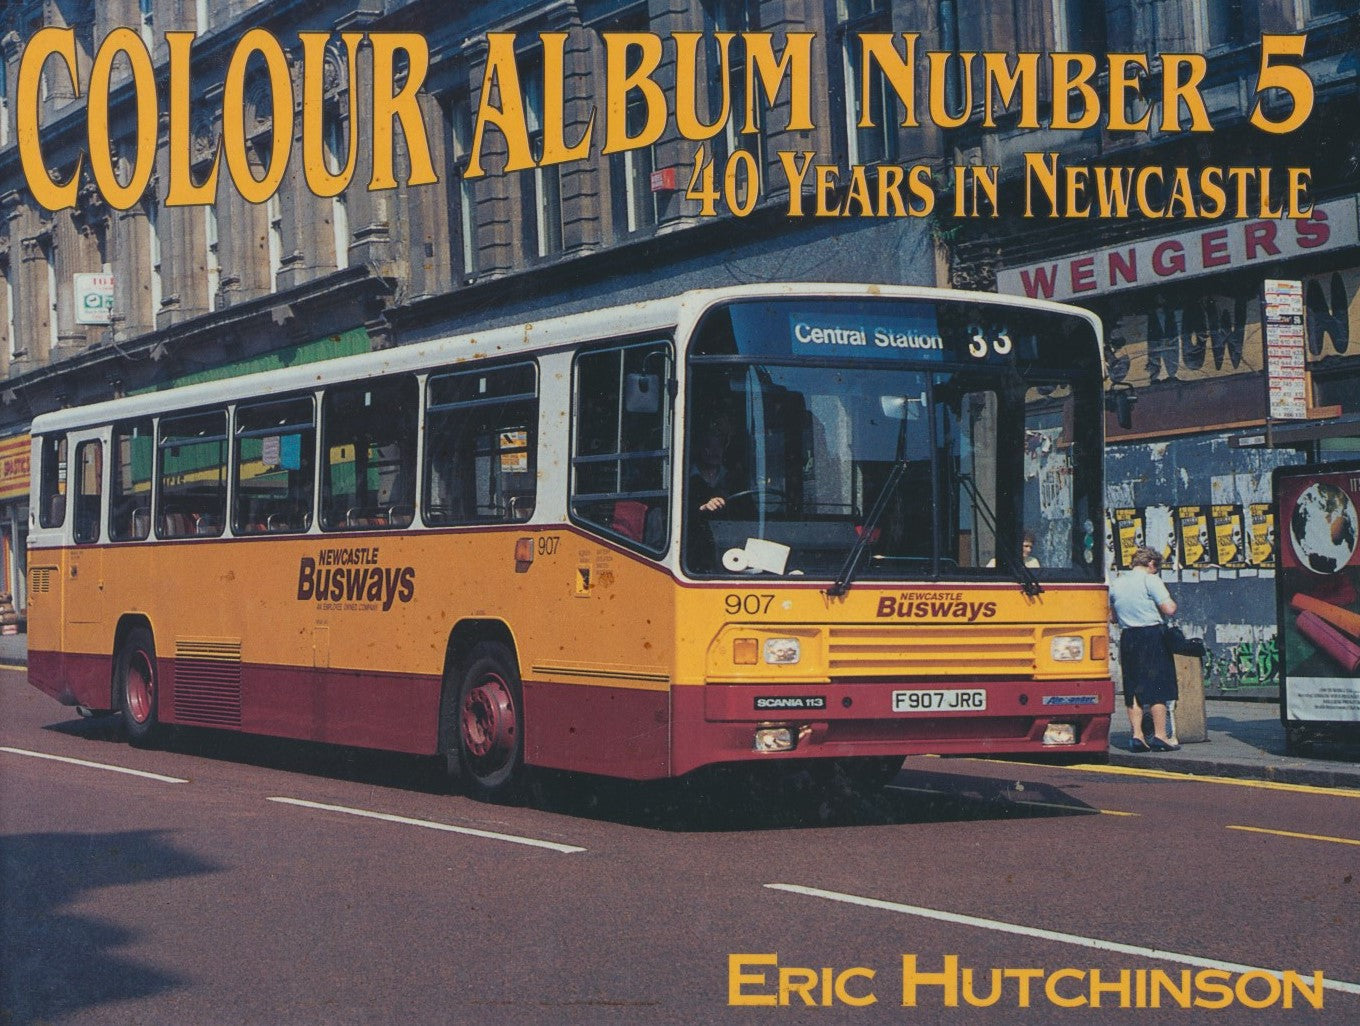 Colour Album Number 5 - 40 Years in Newcastle